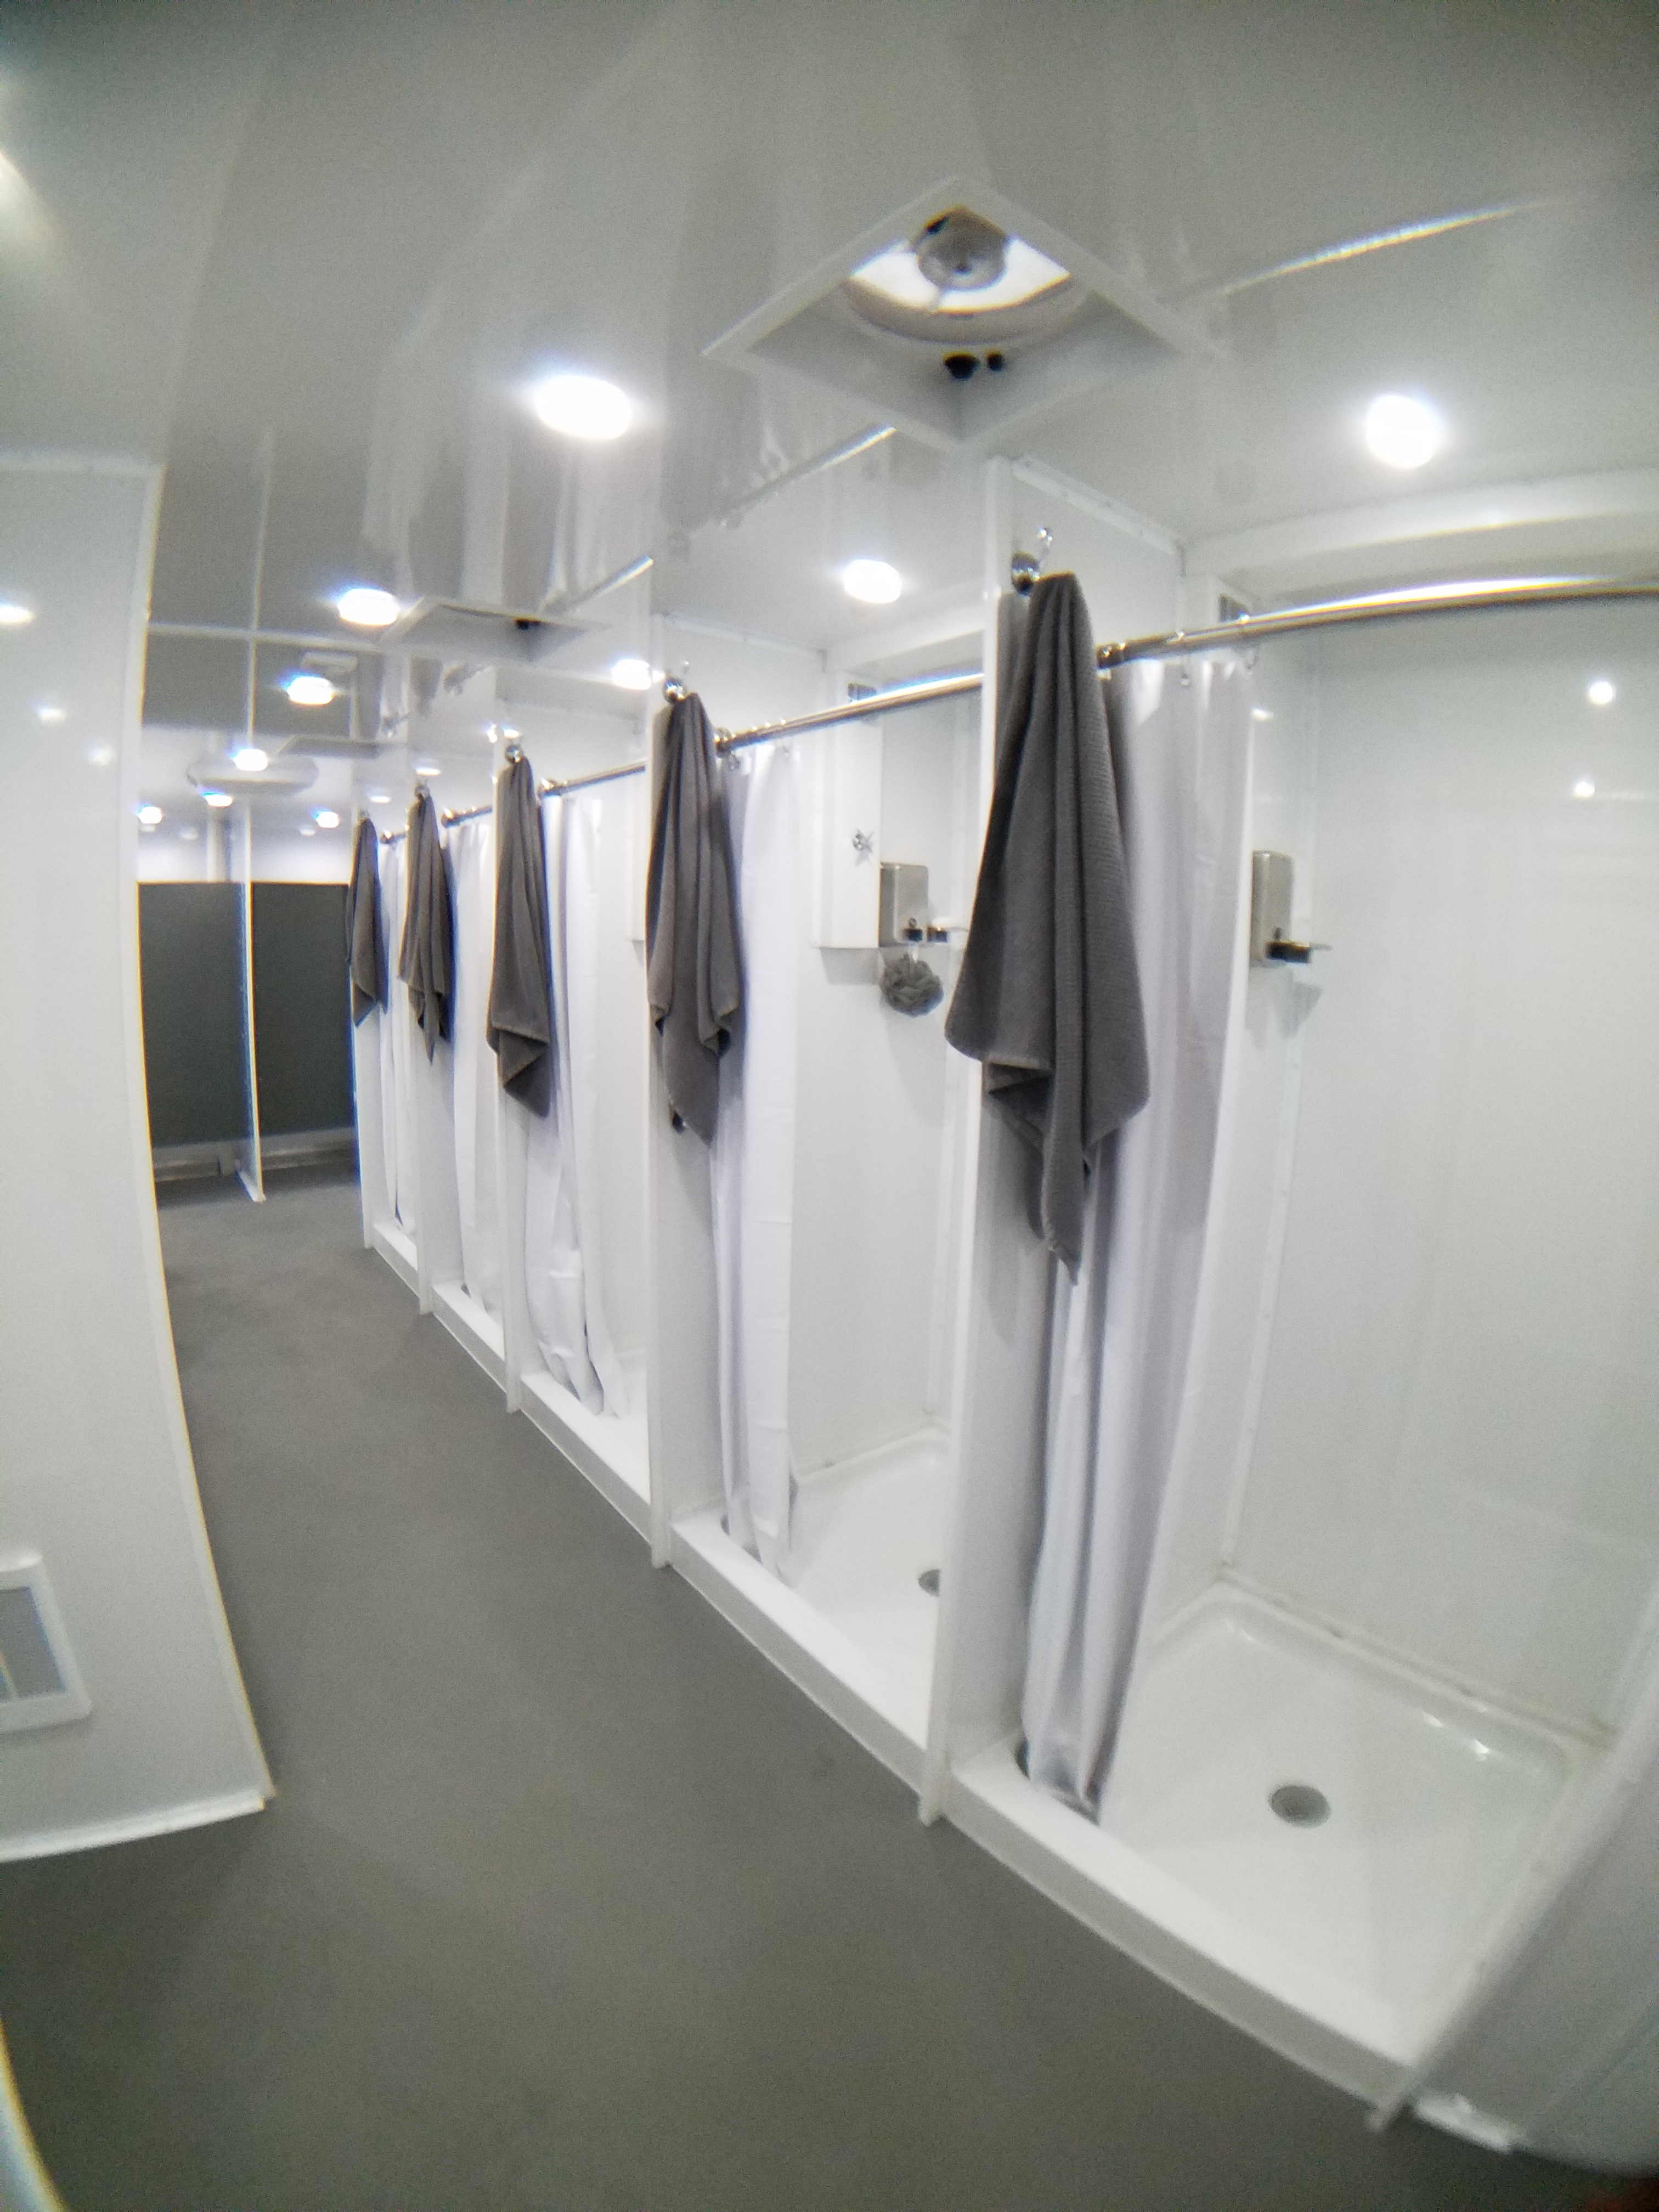 Shower Trailer Rentals are a Growing Market